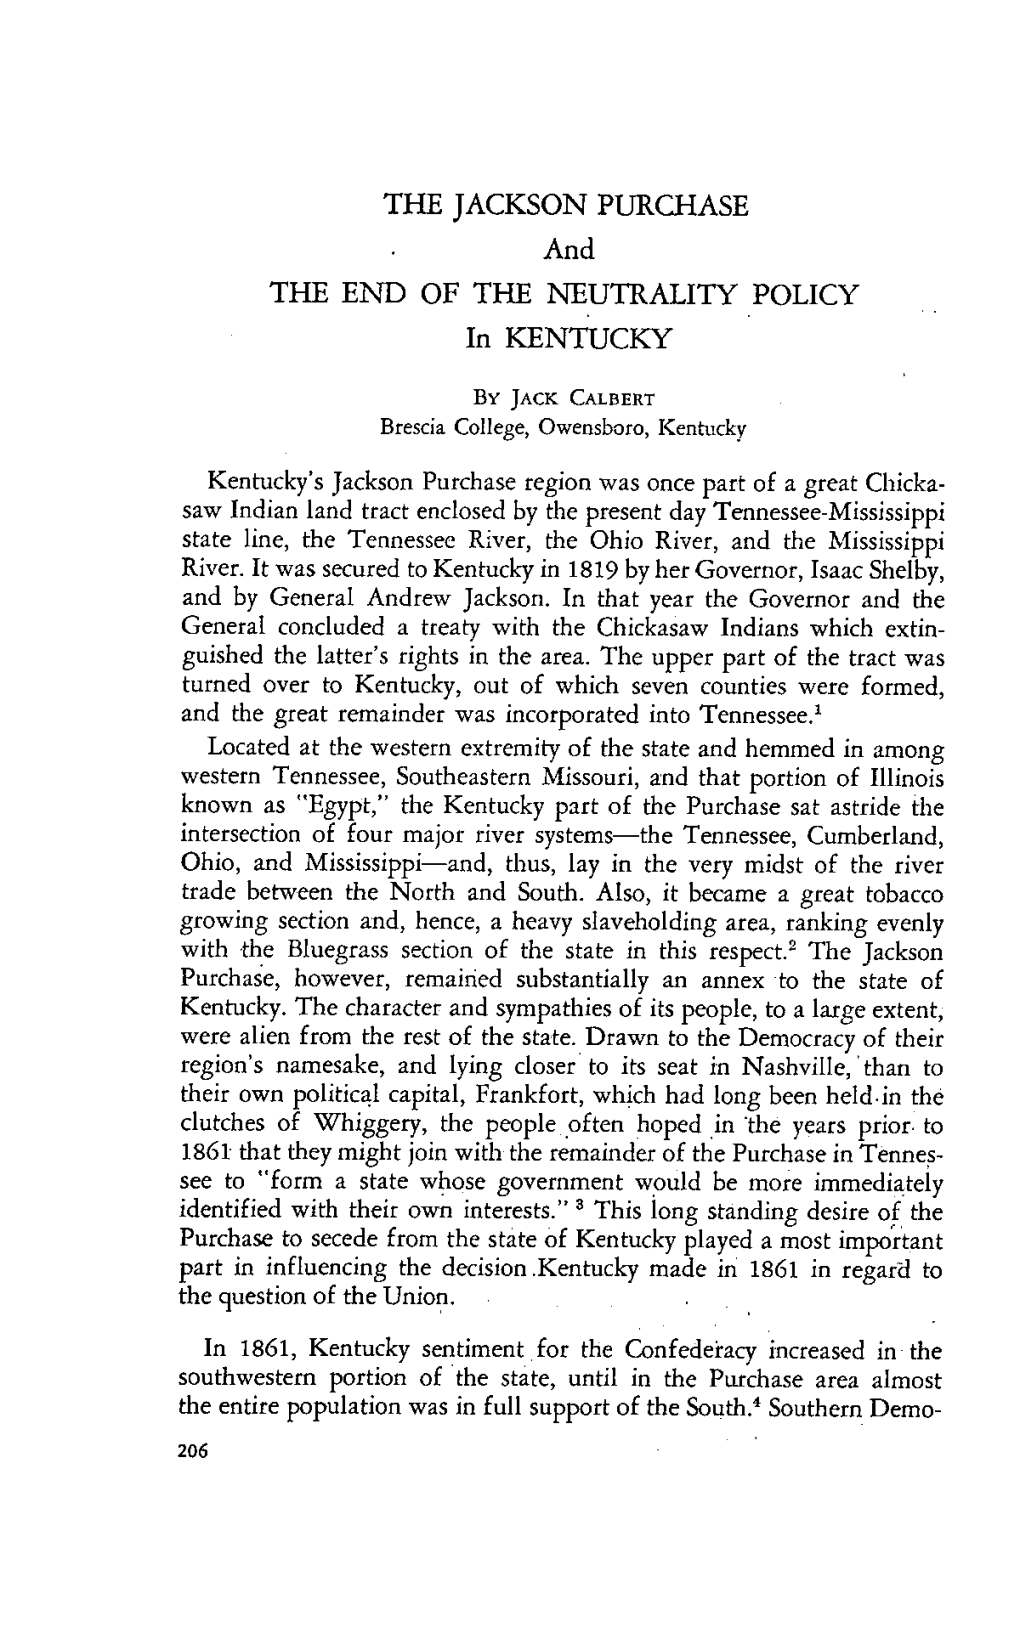 THE JACKSON PURCHASE and the END of the NEUTRALITY POLICY in KENTUCKY